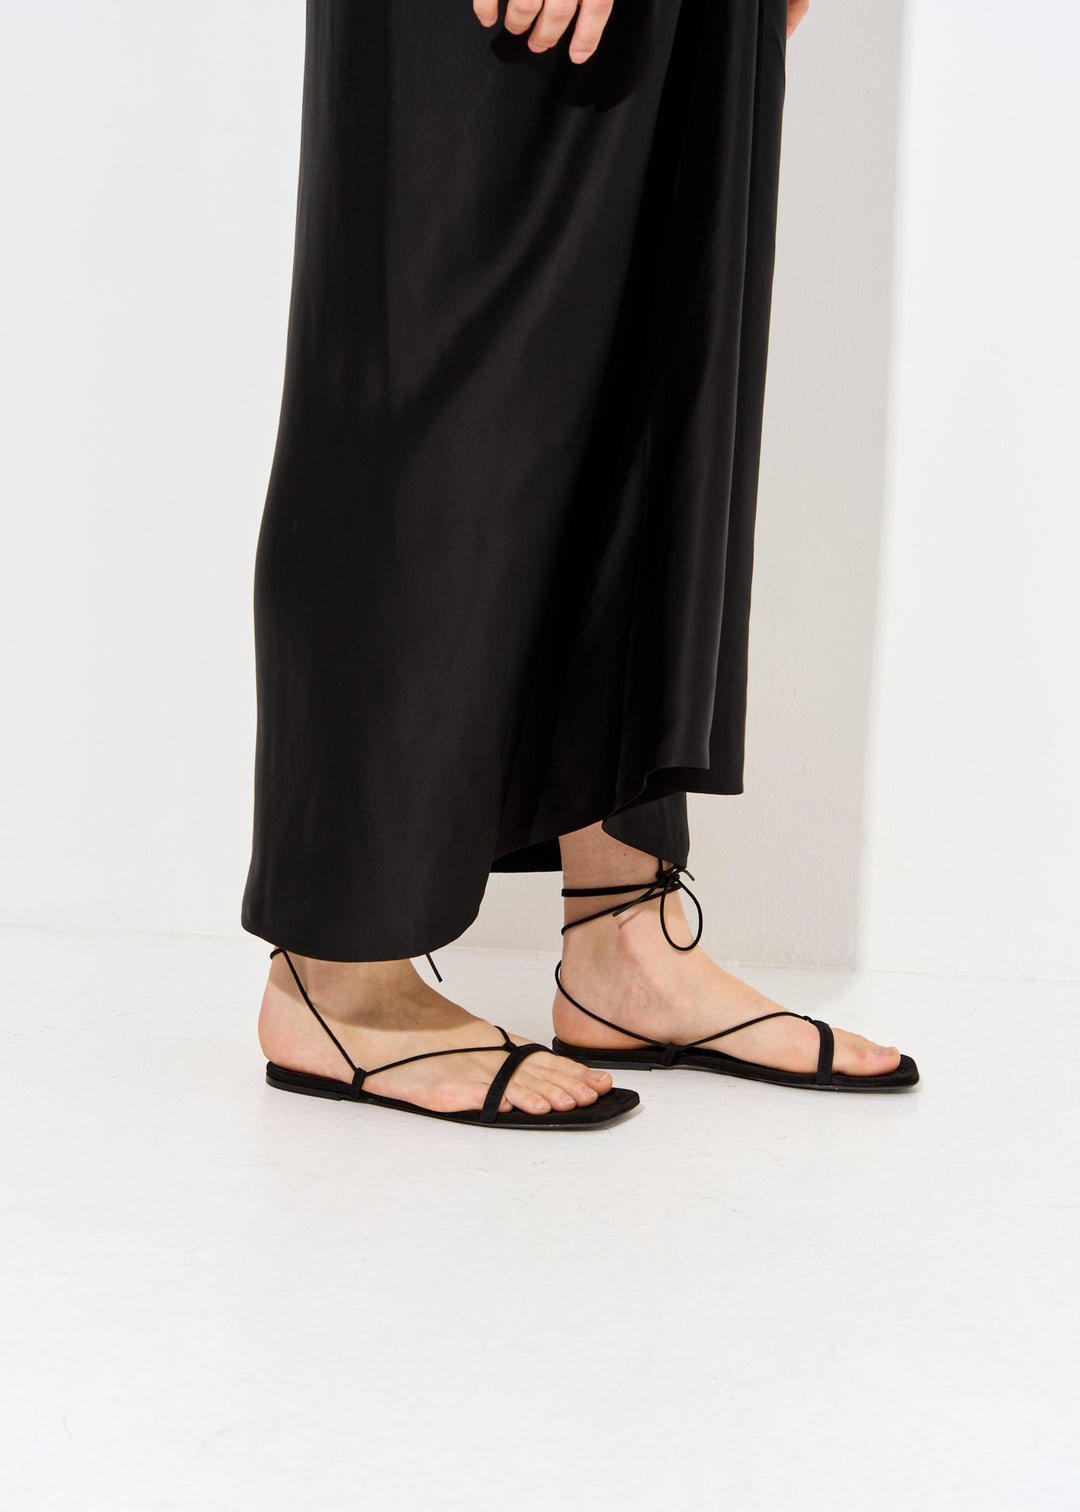 The Suede Tie Sandal